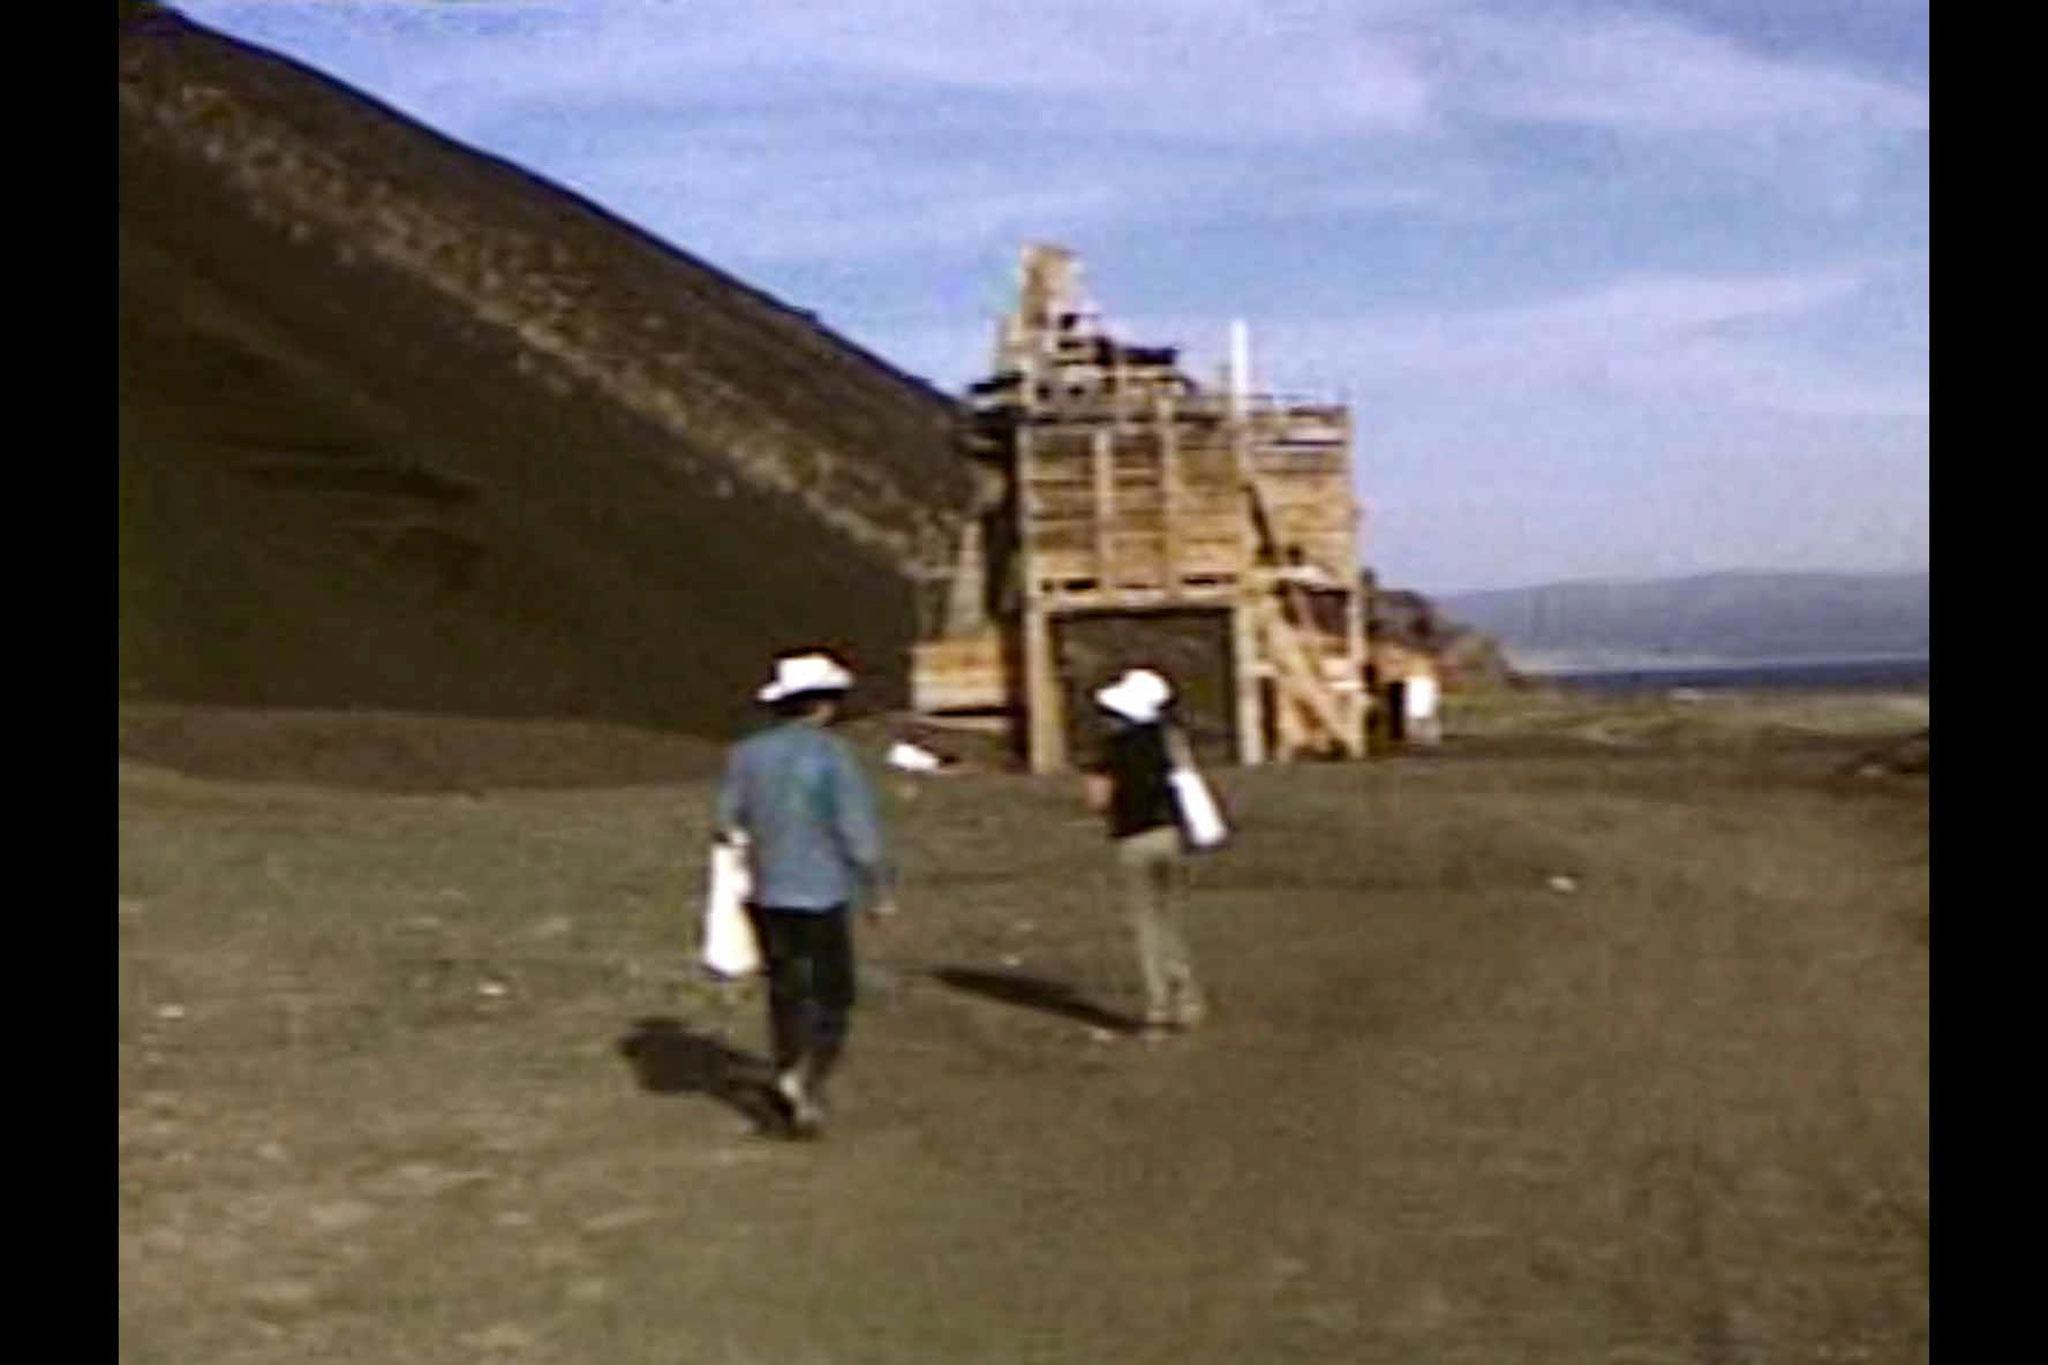 two figures walking toward an industrial building with a slope of gravel in the background.